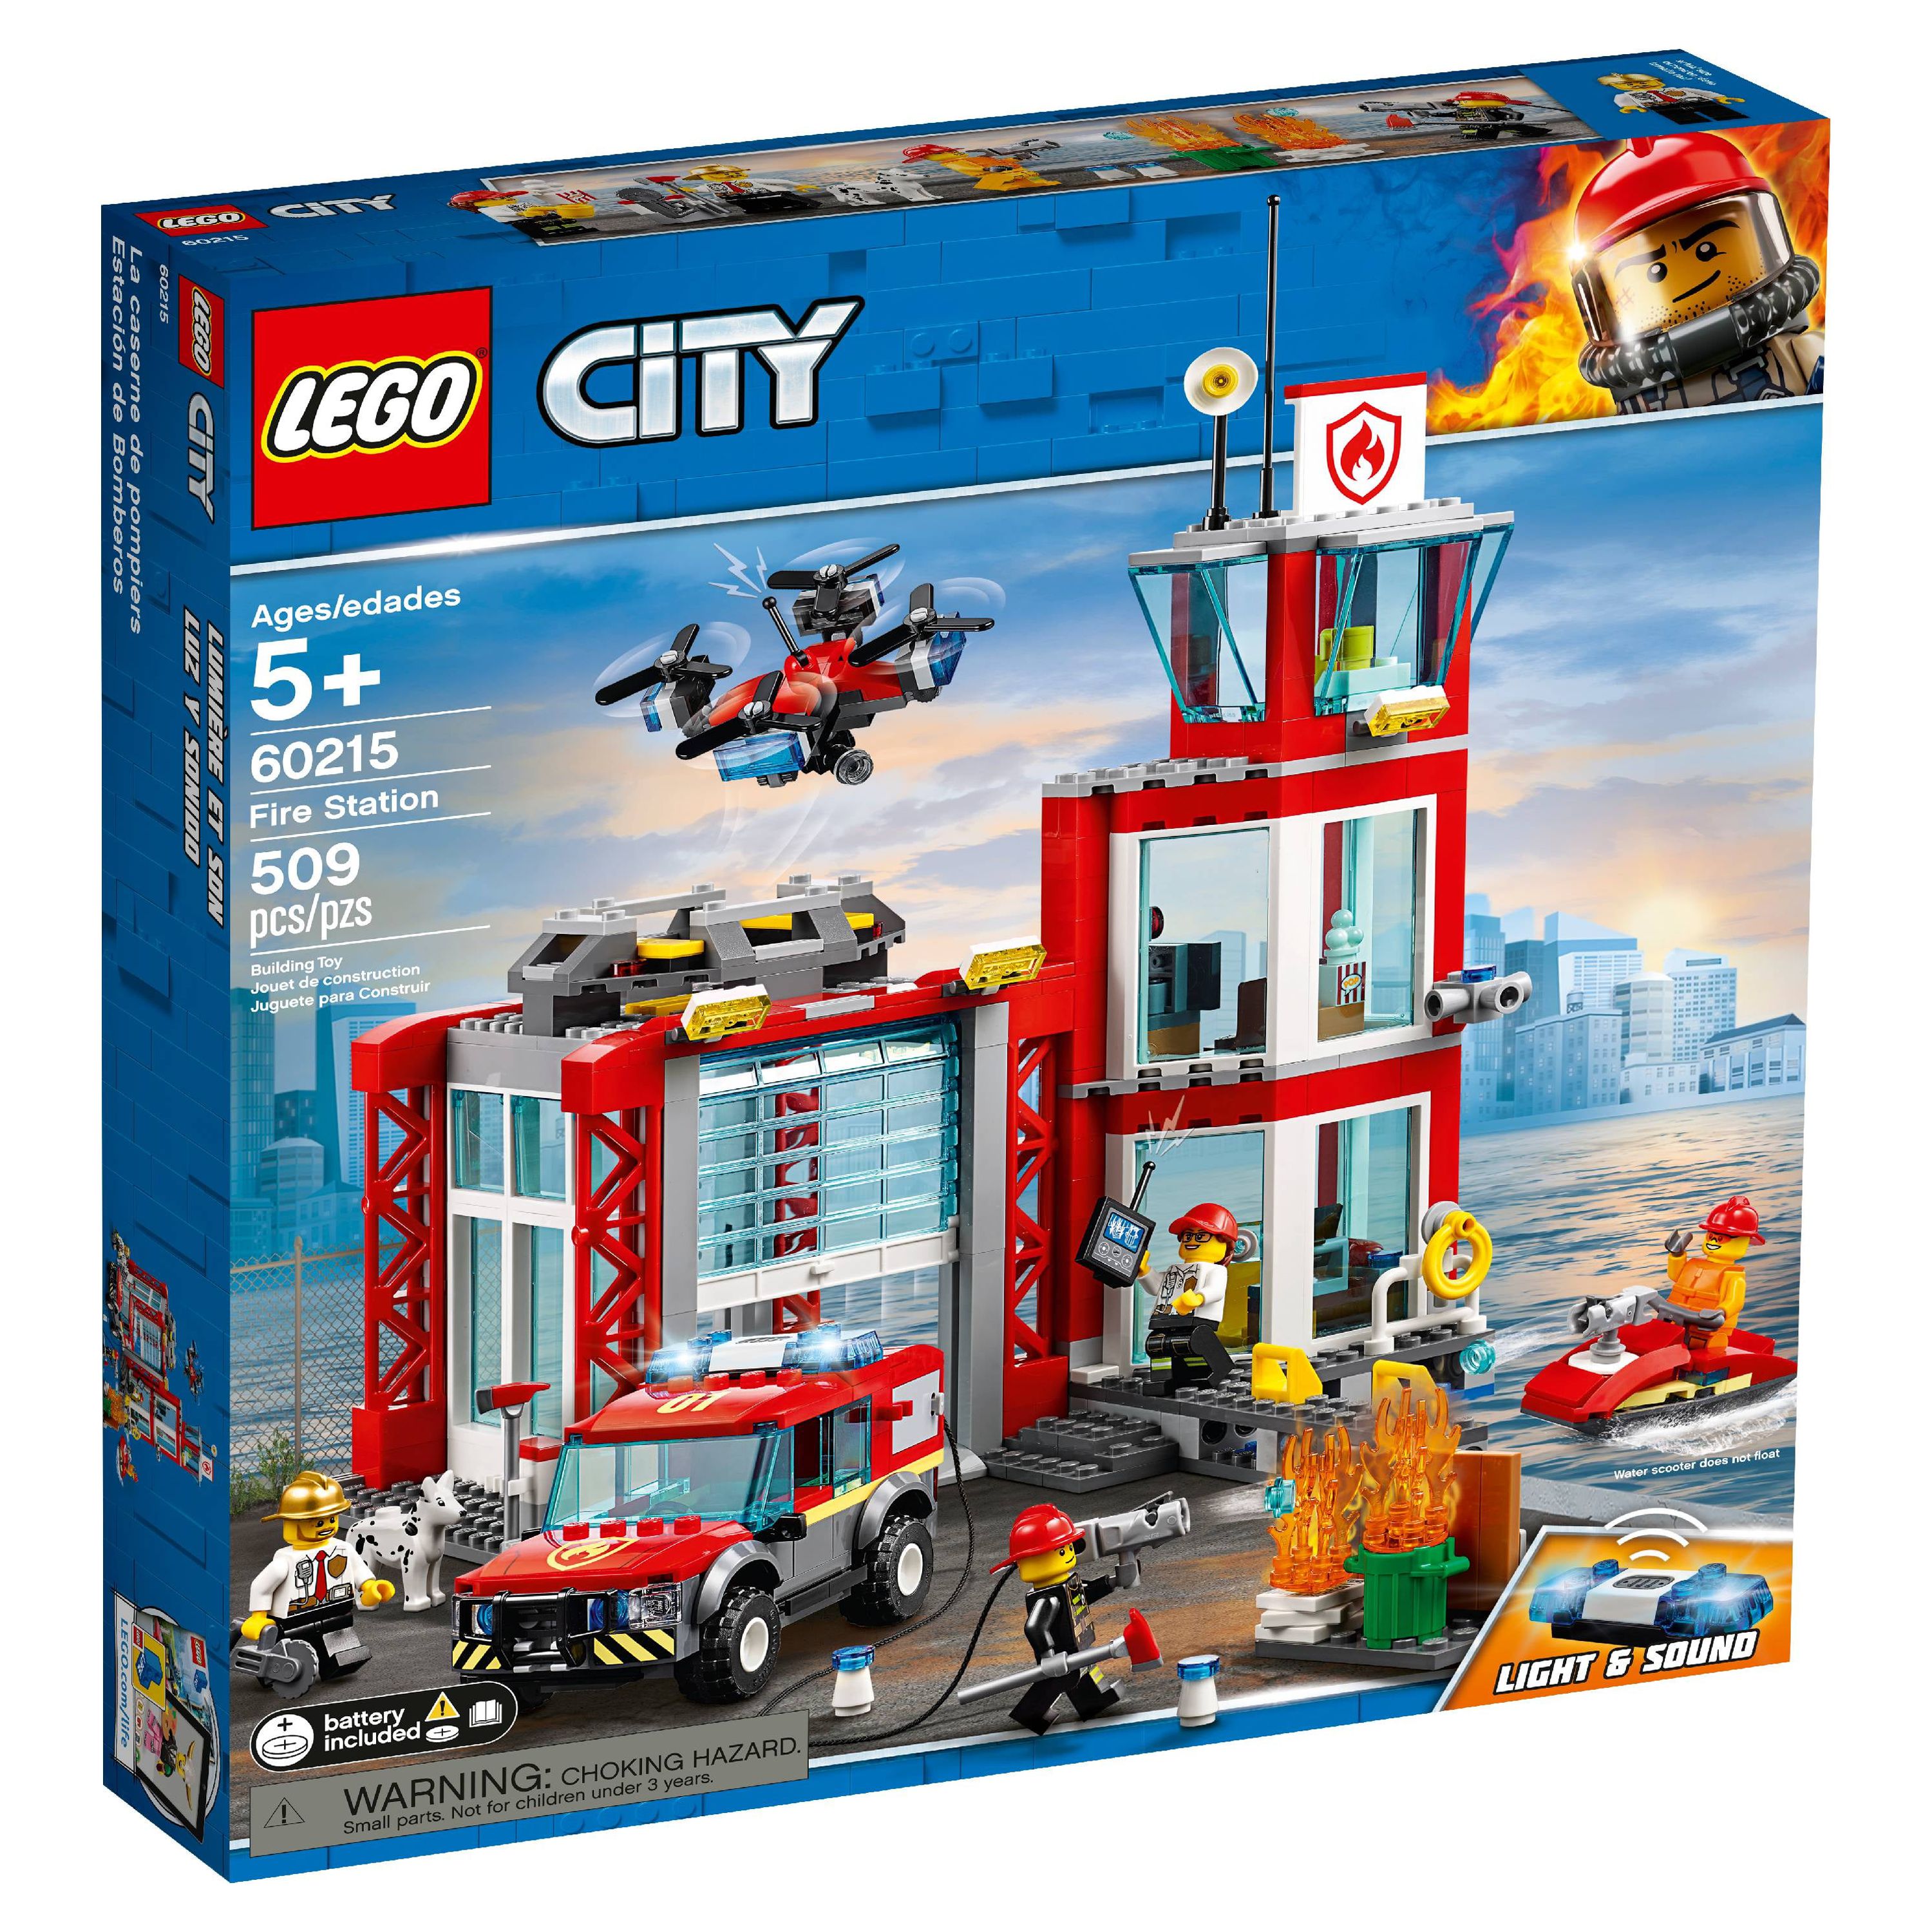 LEGO City Fire Fire Station 60215 Building Set (509 Pieces) - image 5 of 8